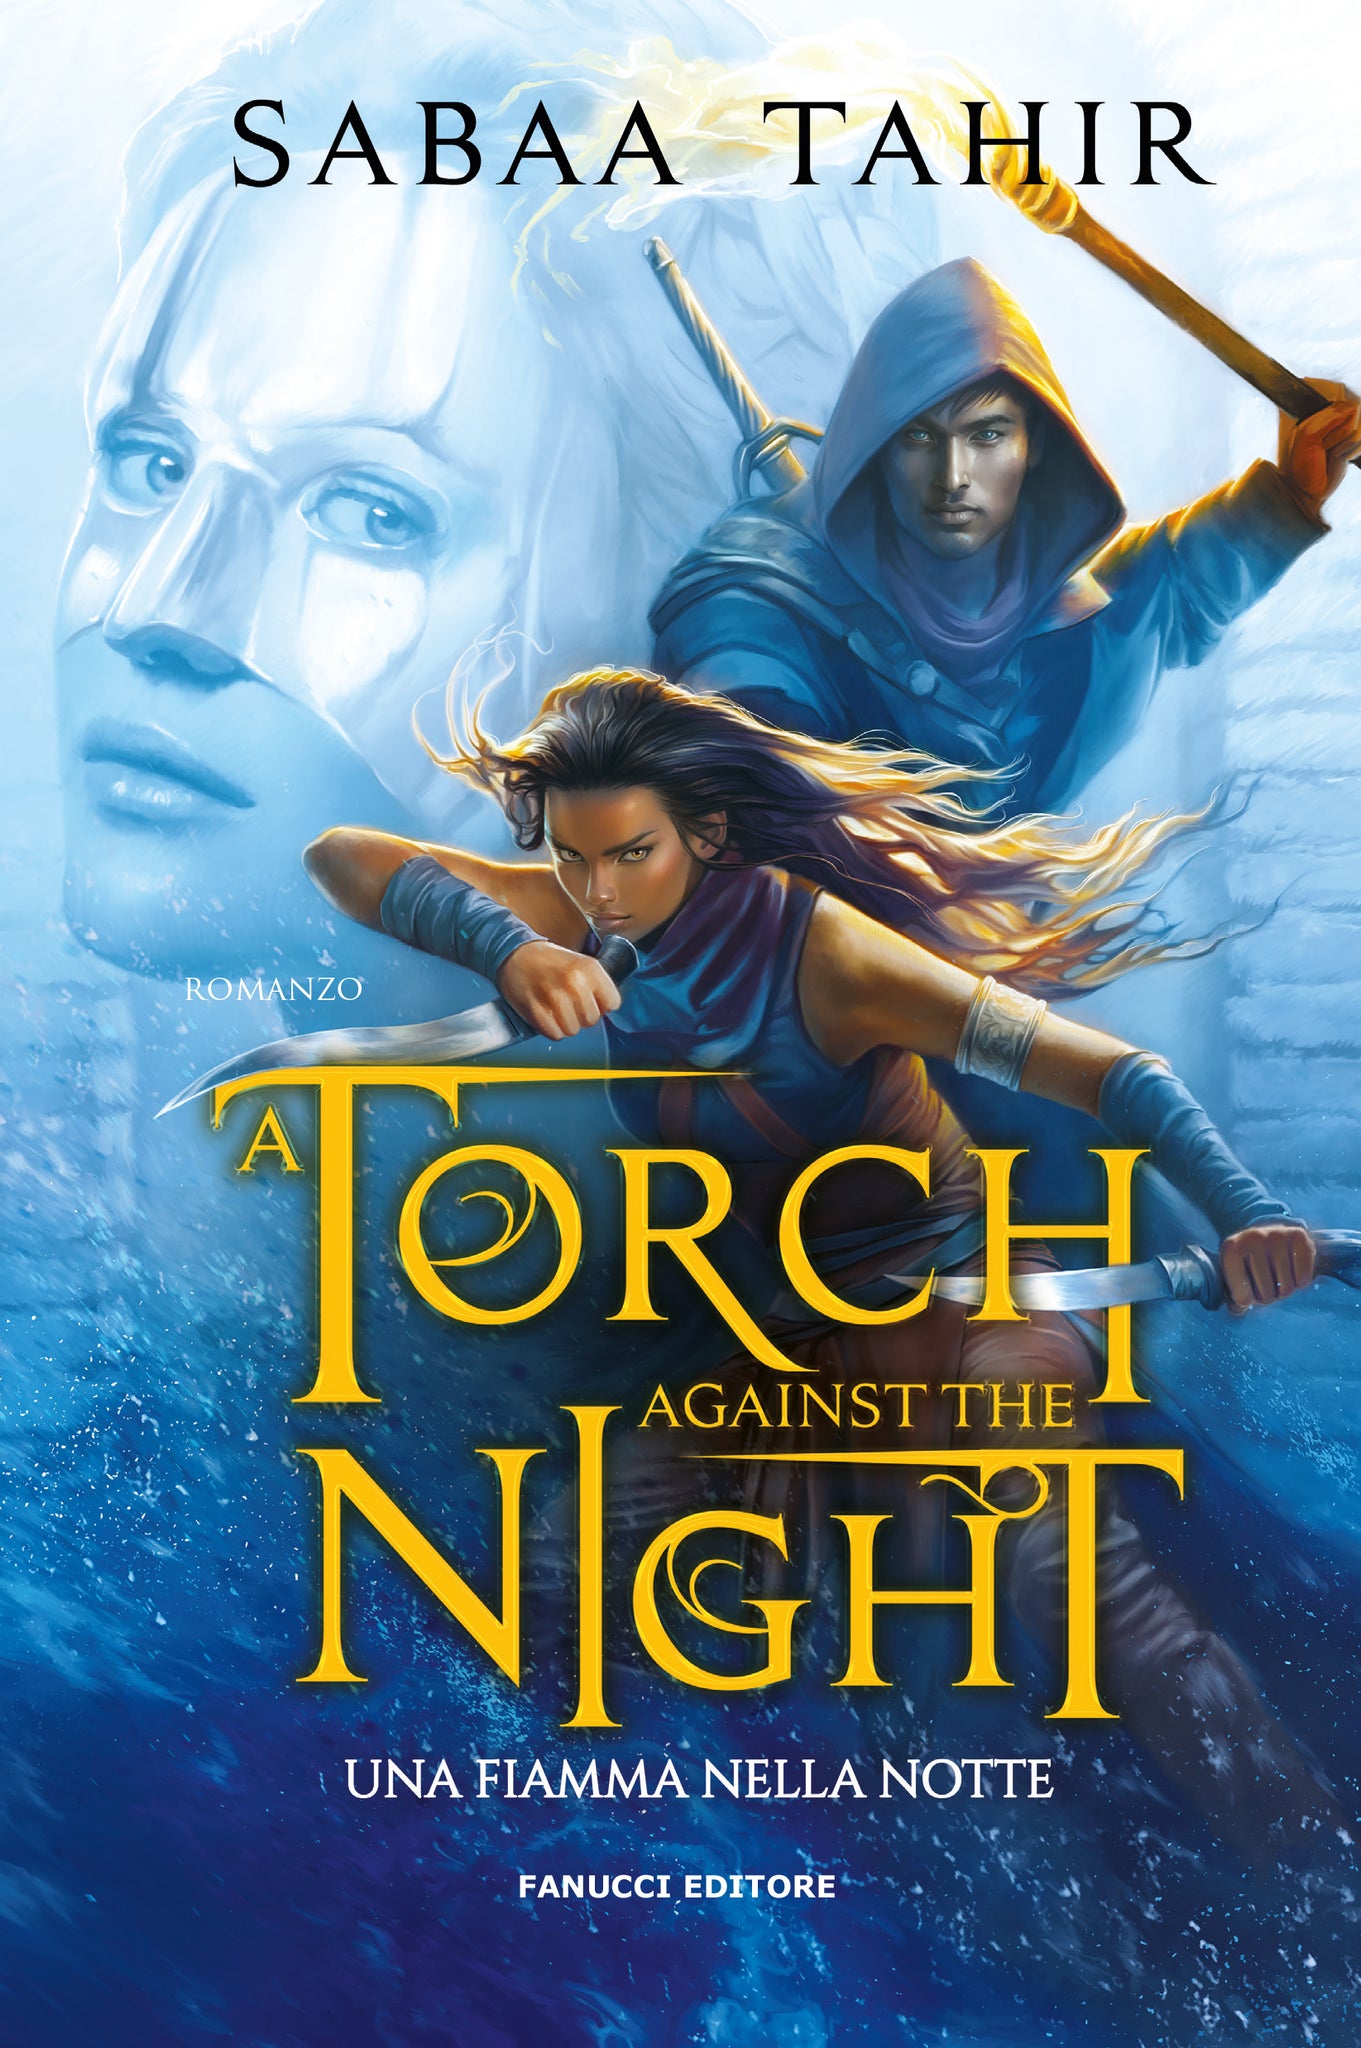 A Torch Against the Night: Una fiamma nella notte – An Ember in the Ashes vol. 2